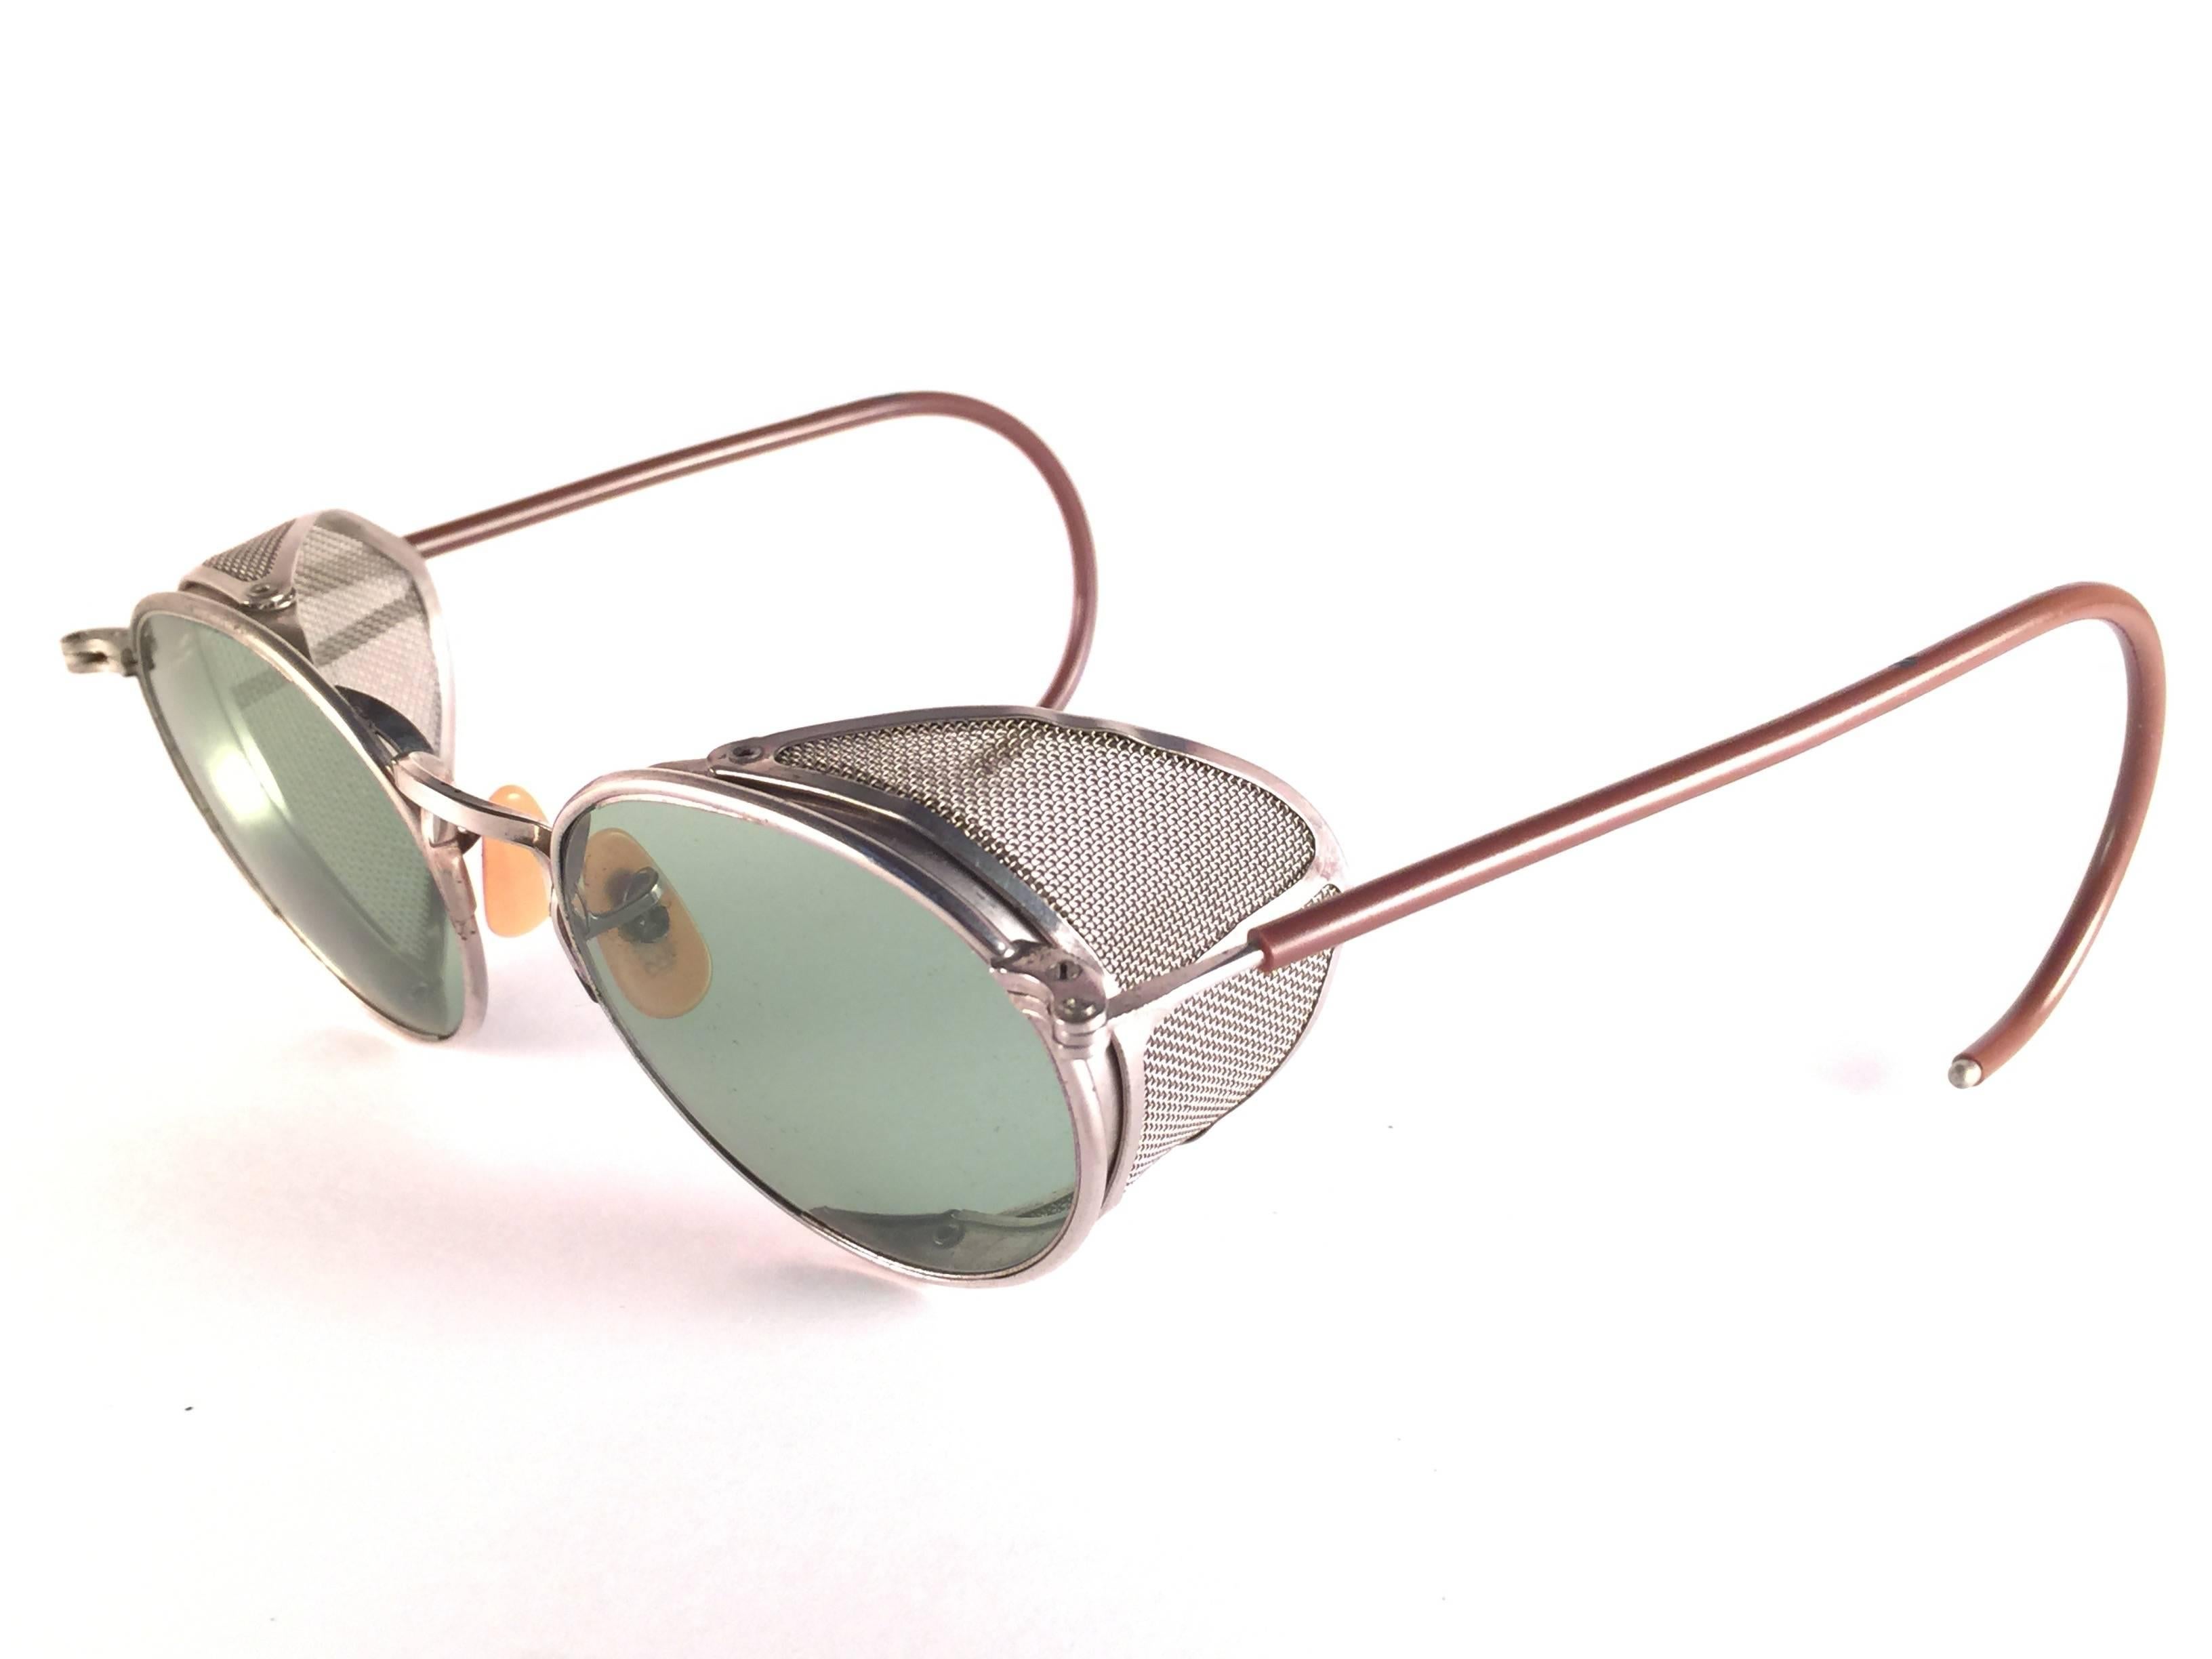 Superb Item!  1950's Bausch & Lomb Safety Goggles. 
Folding silver metal side cups and special wrapped temples. 
Mint true green round lenses with light wear on them. Please note that this item is nearly 70 years old and has some ageing patina on